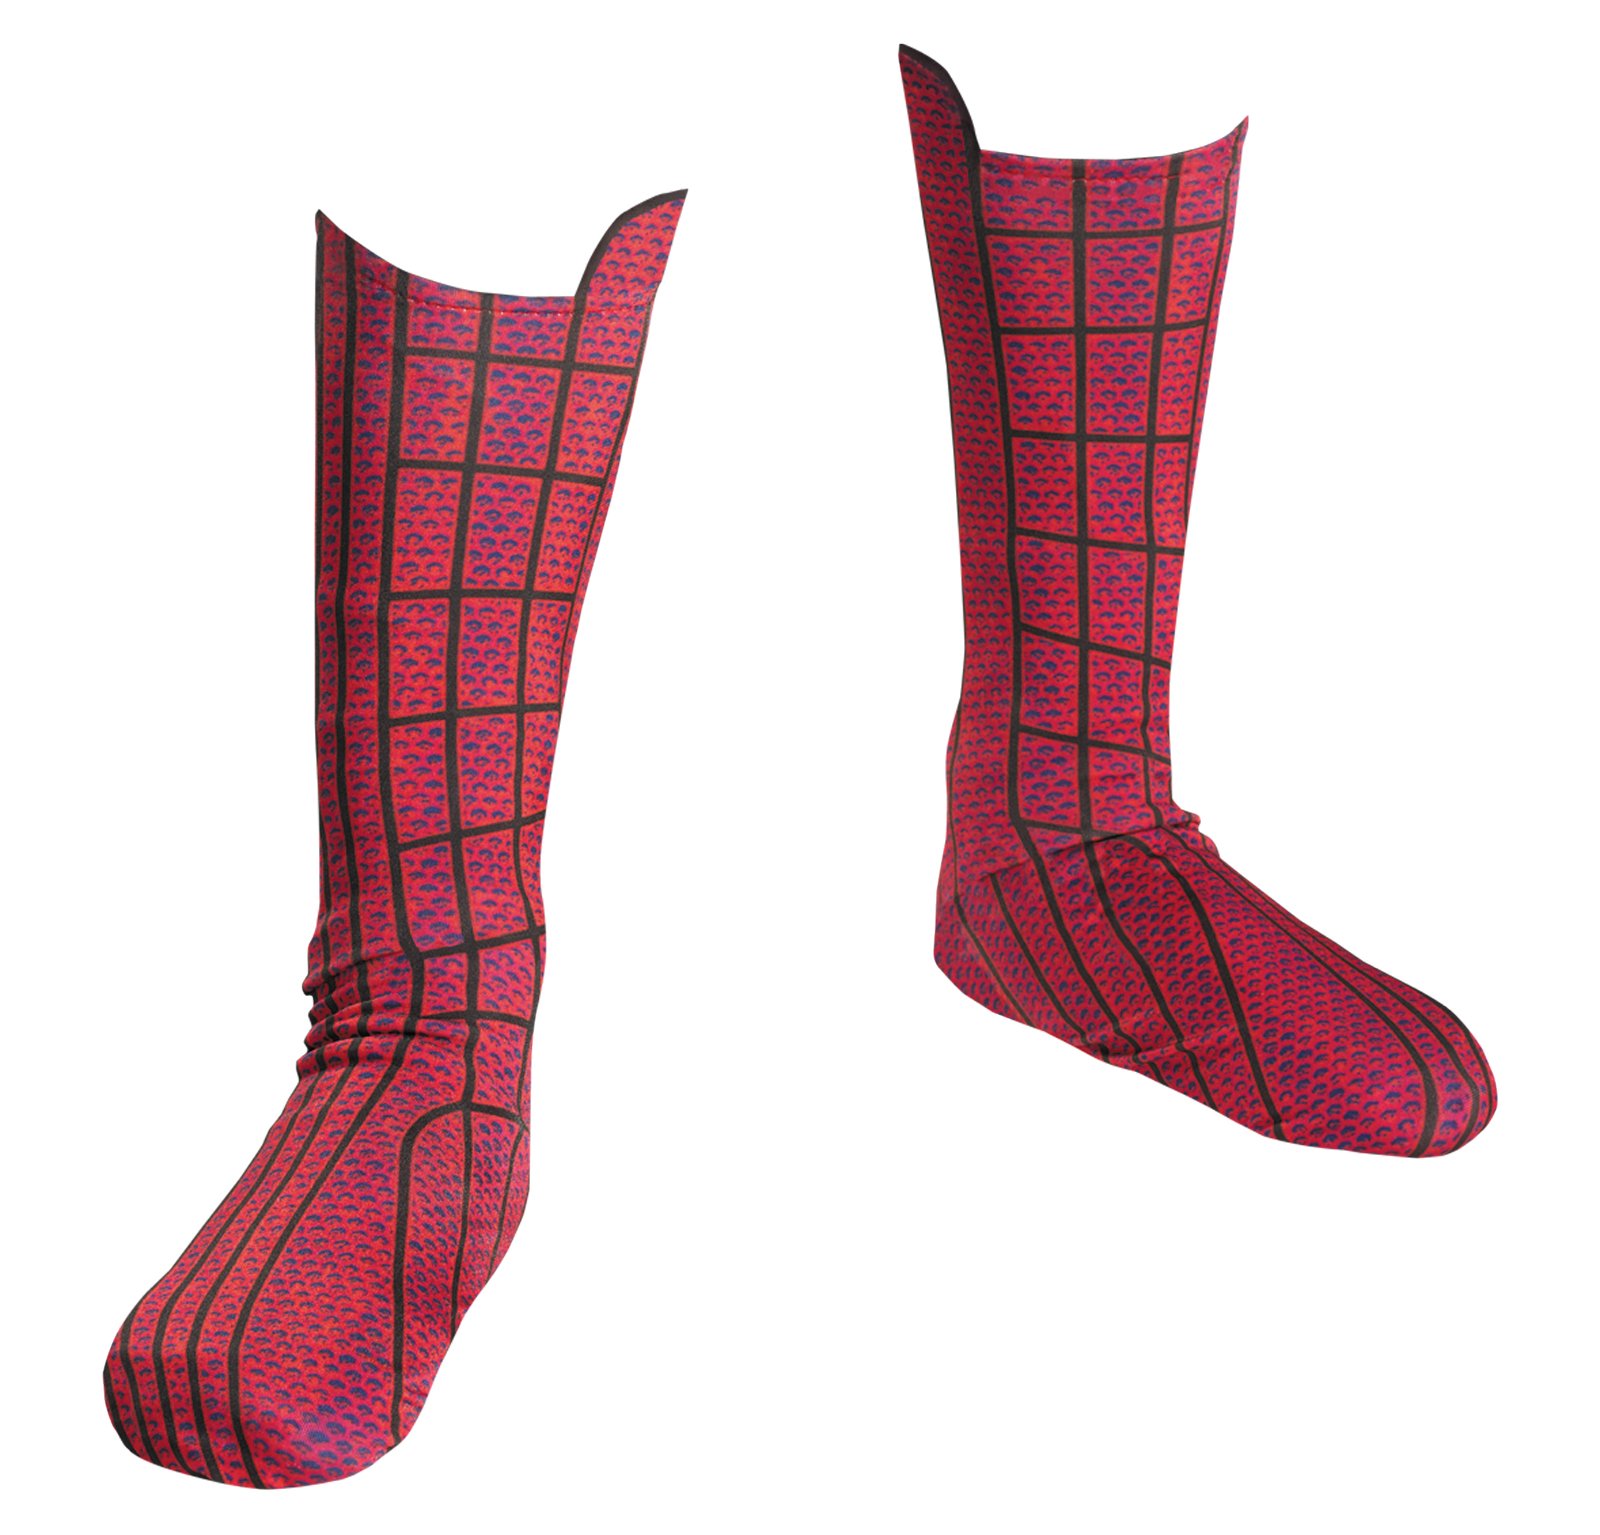 The Amazing Spider-Man Child Boot Covers